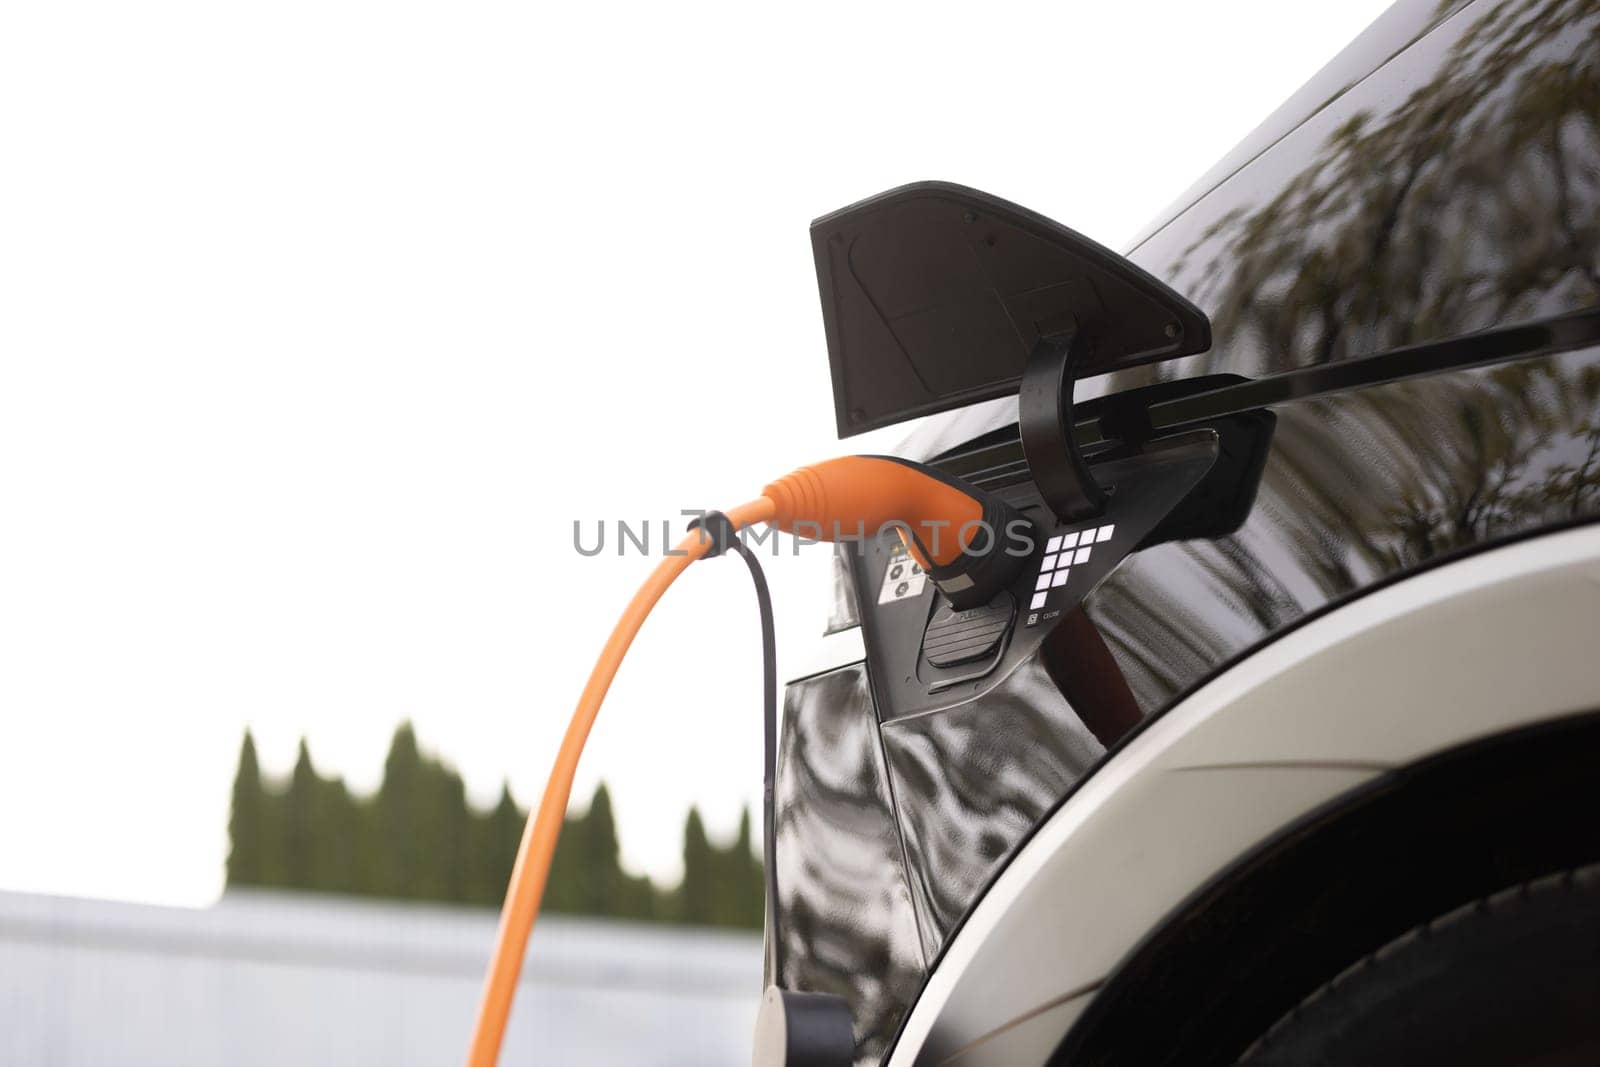 Electric car charging. Electric vehicle charging port plugging in car. Charging technology, Clean energy filling technology by uflypro